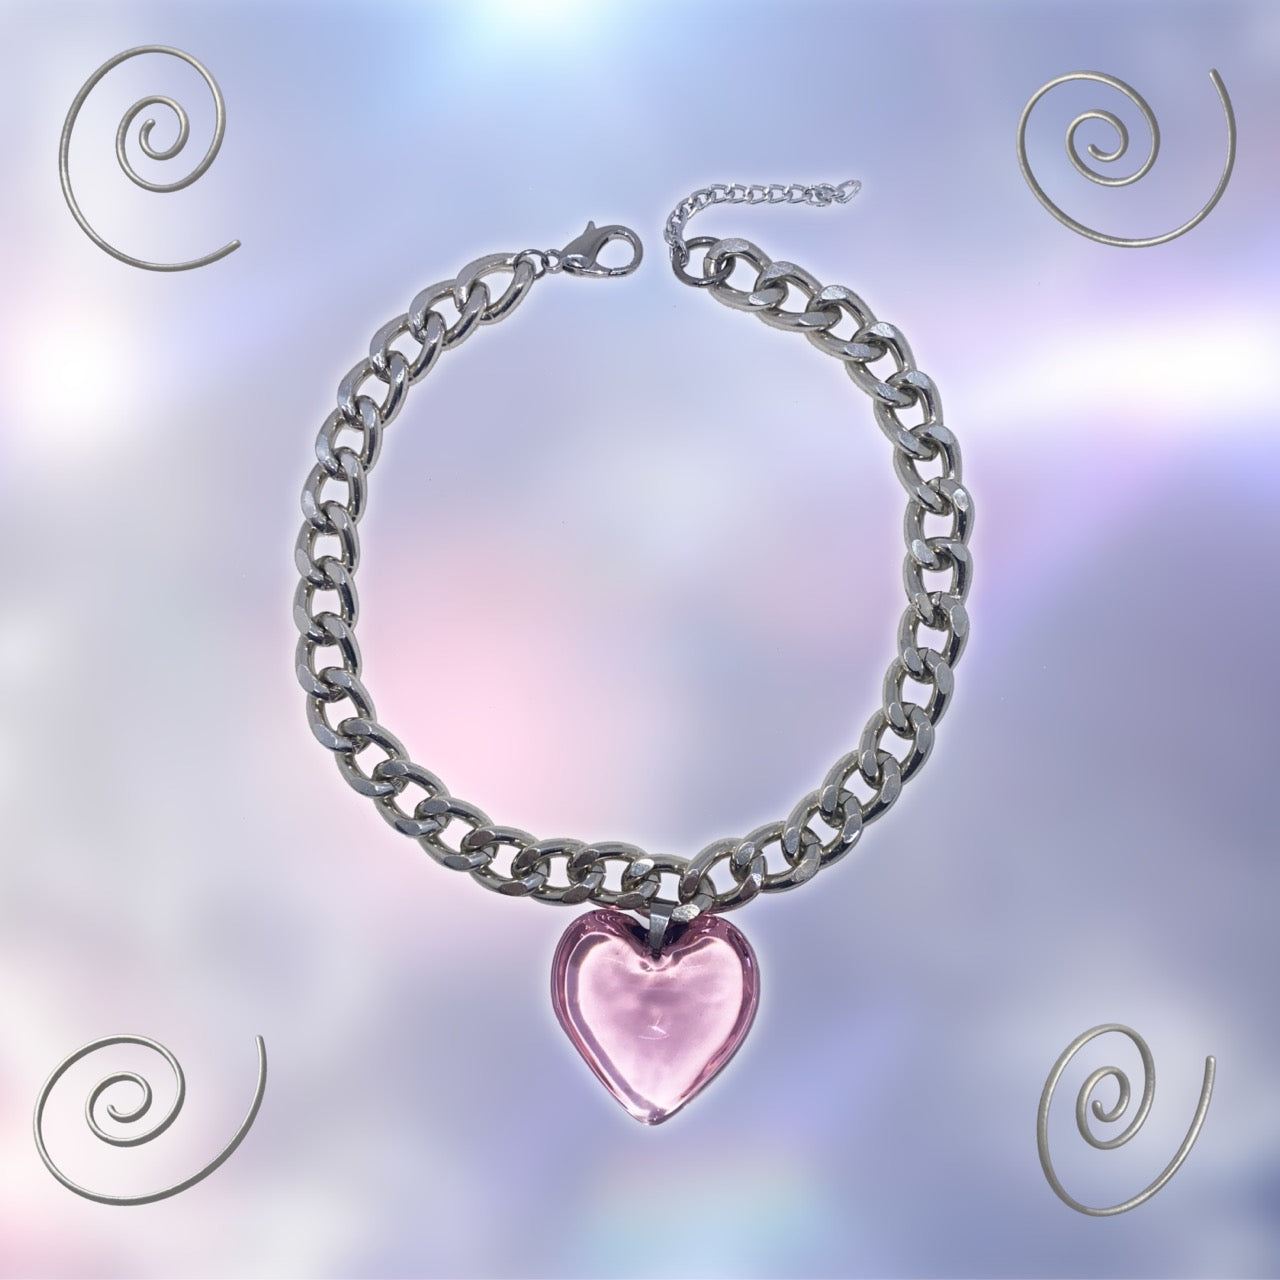 THE BABY PINK HEART SEMI CHOKER CHAIN NECKLACE - EXCLUSIVE Jewelry from SOFT RUINS - Just $50.00! SHOP NOW AT IAMINHATELOVE BOTH IN STORE FOR CYPRUS AND ONLINE WORLDWIDE